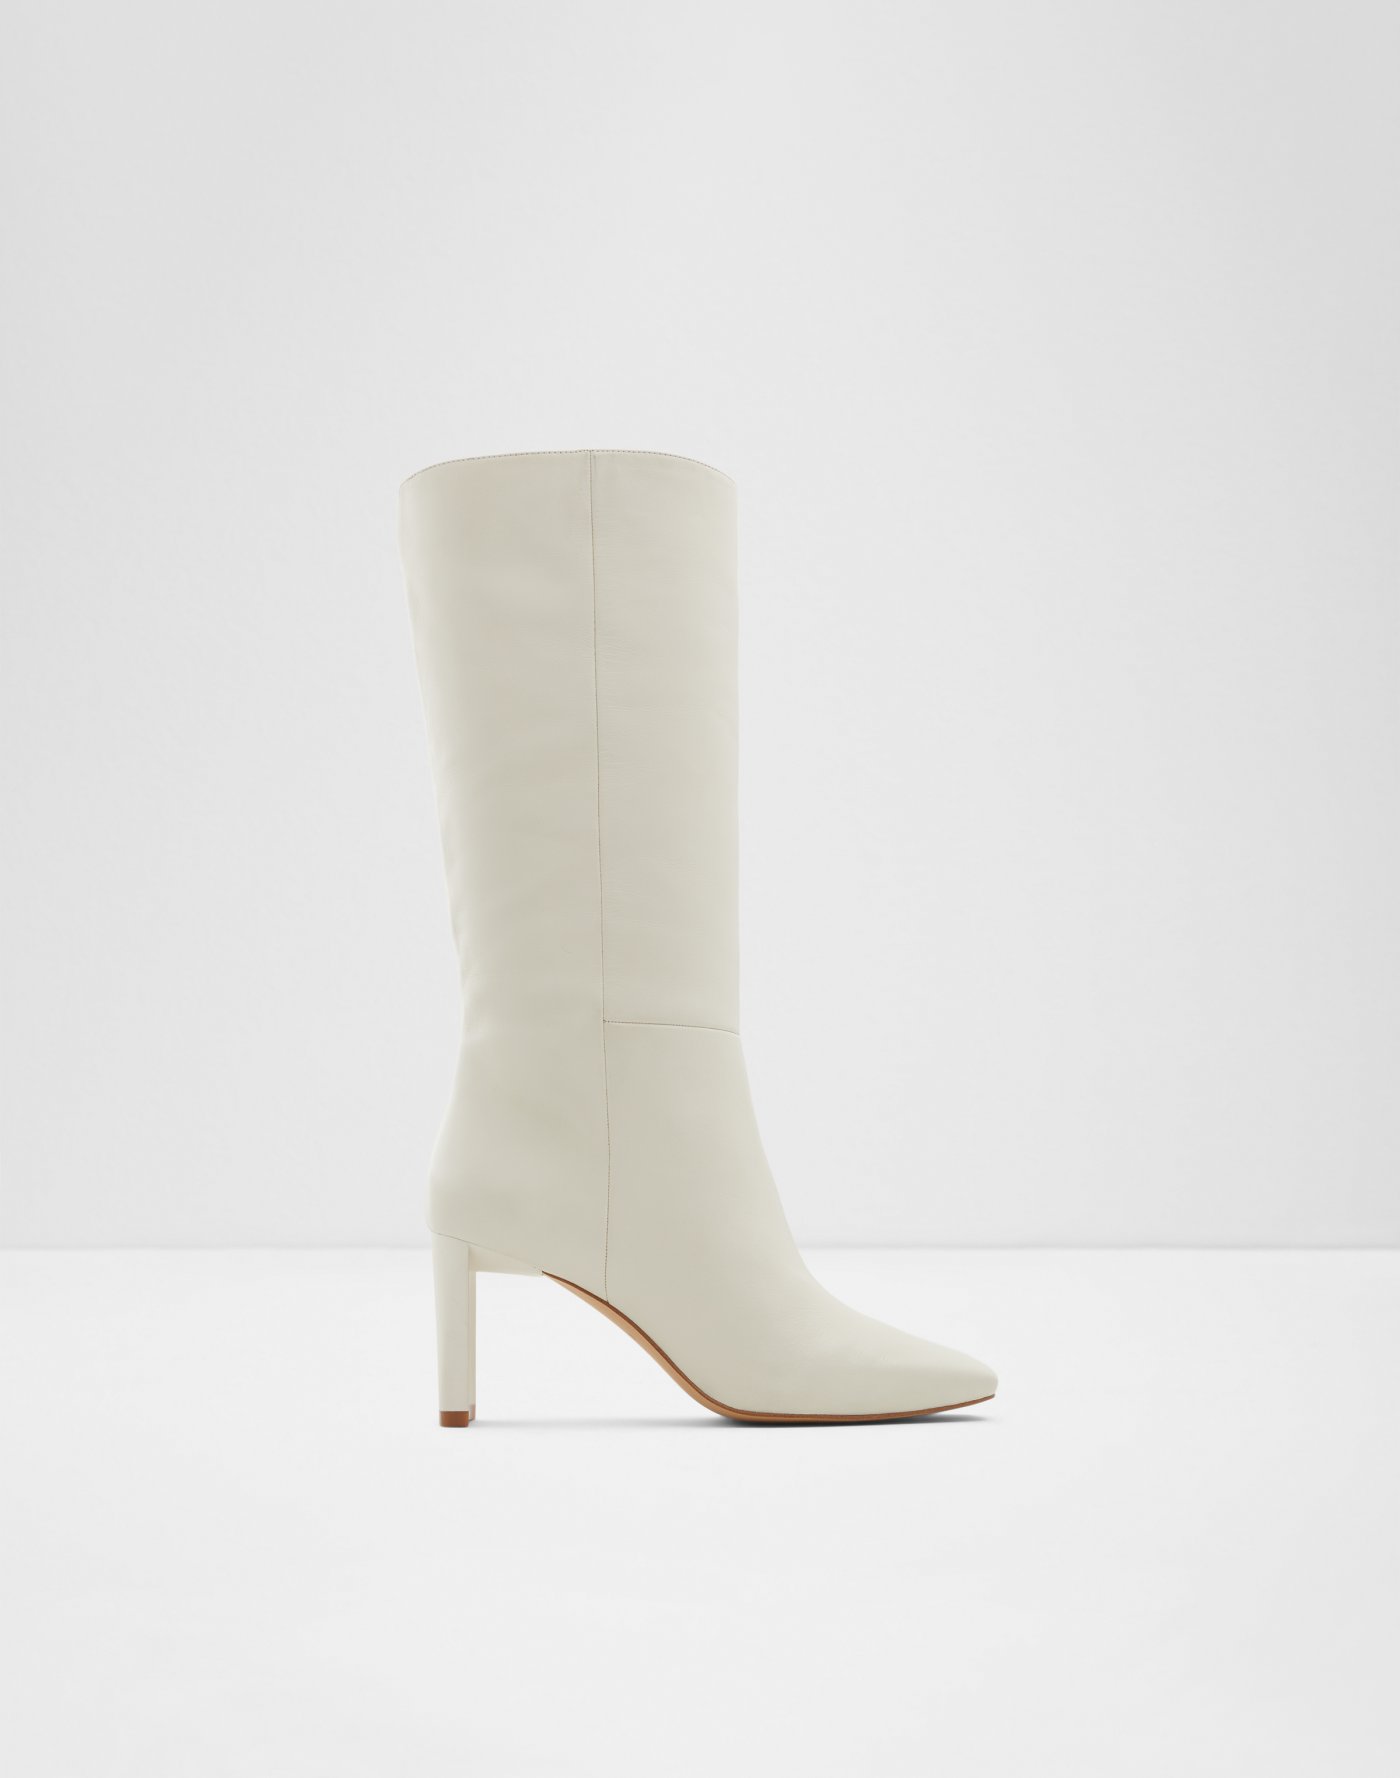 Women's Boots, Booties & Ankle Boots | ALDO US